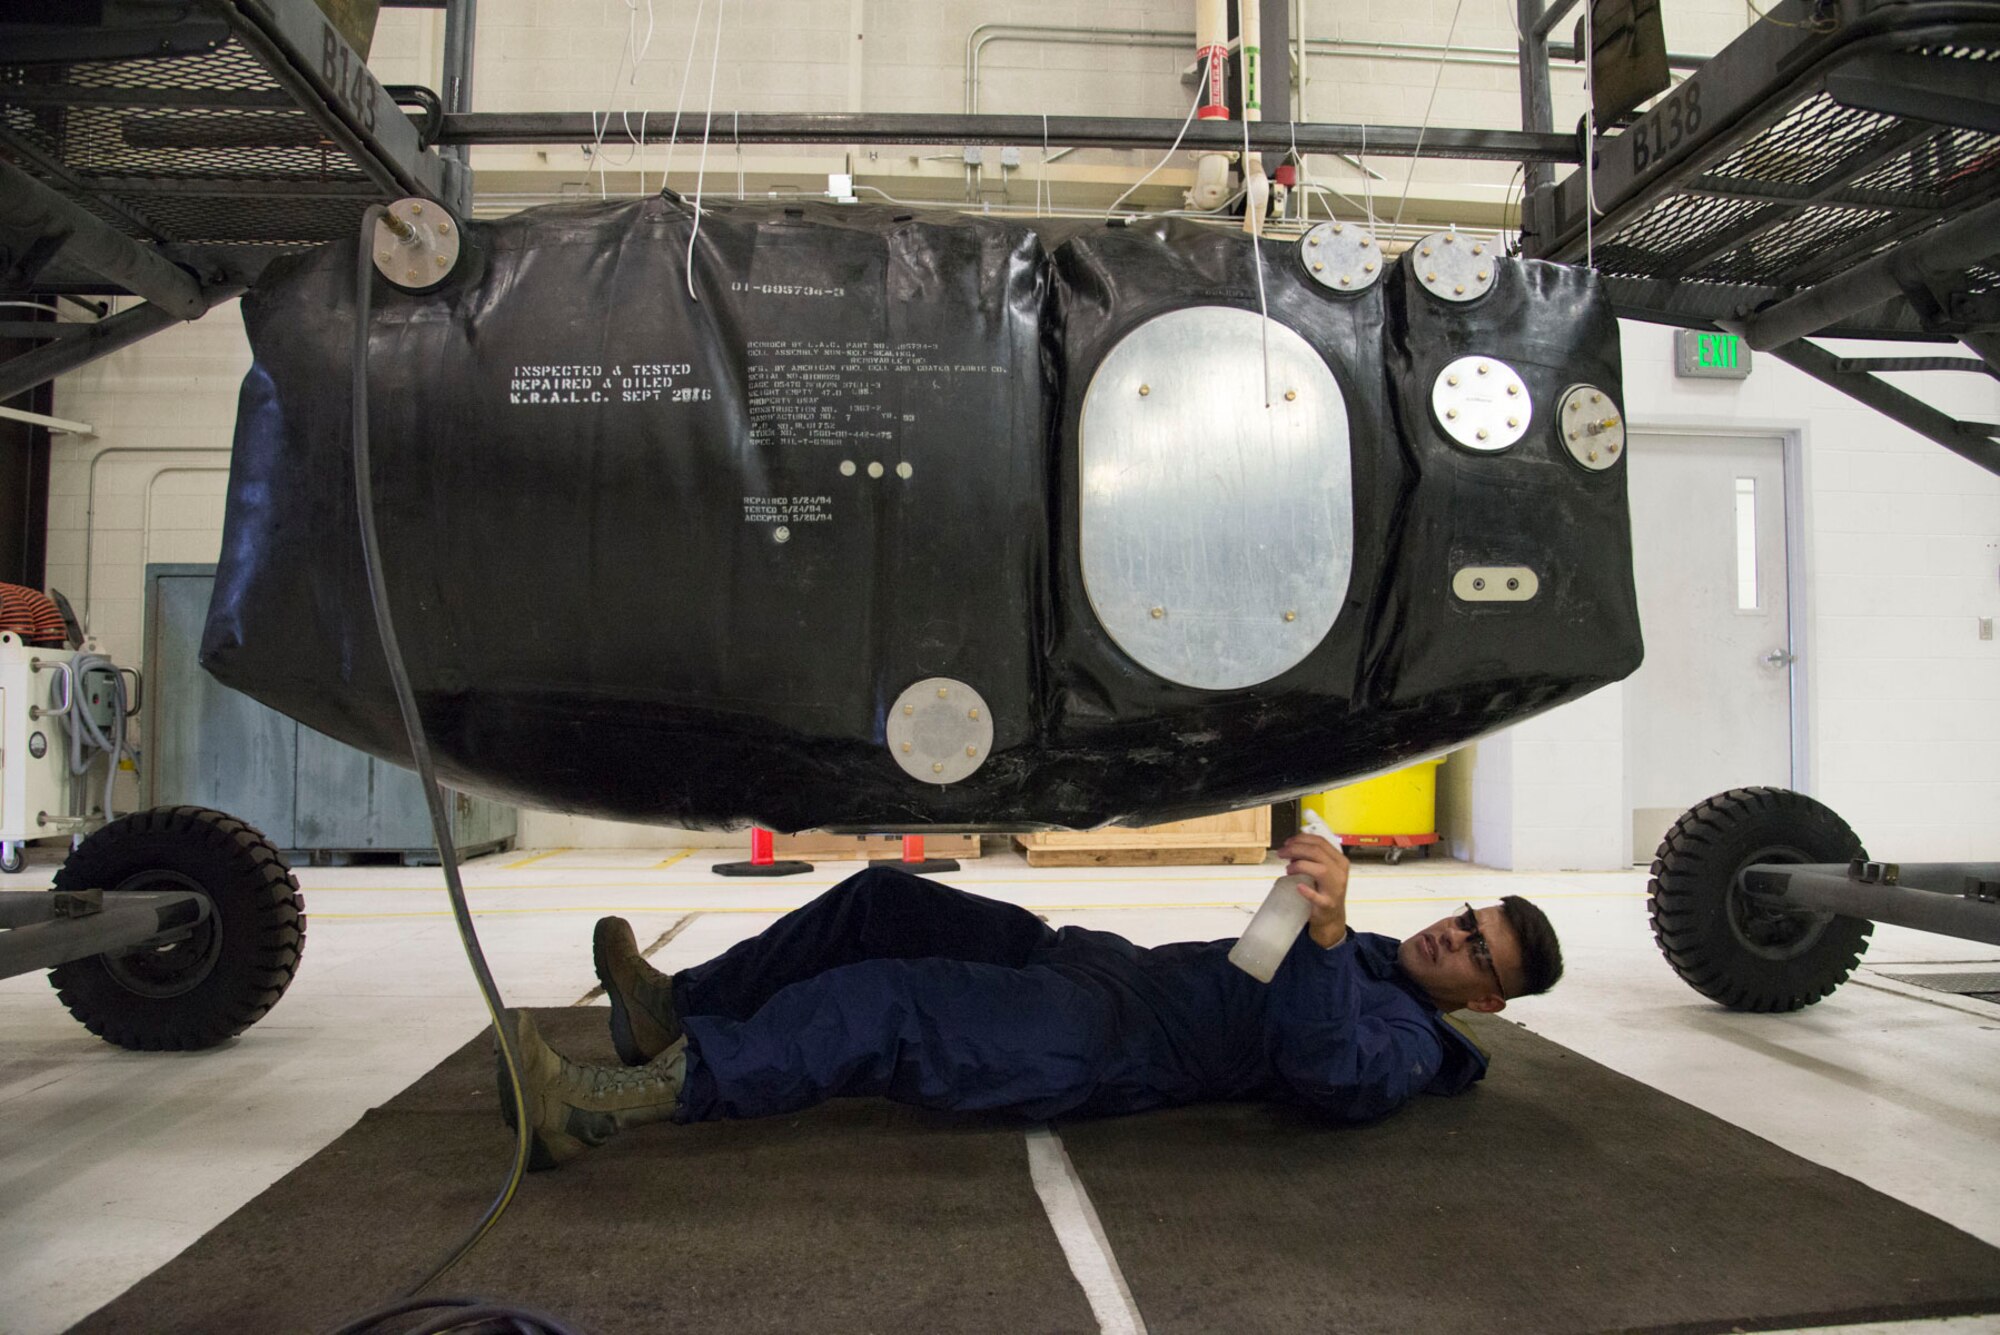 Fuel system technician laying on the ground spraying soapy water from a spray onto an inflated aircraft fuel cell.